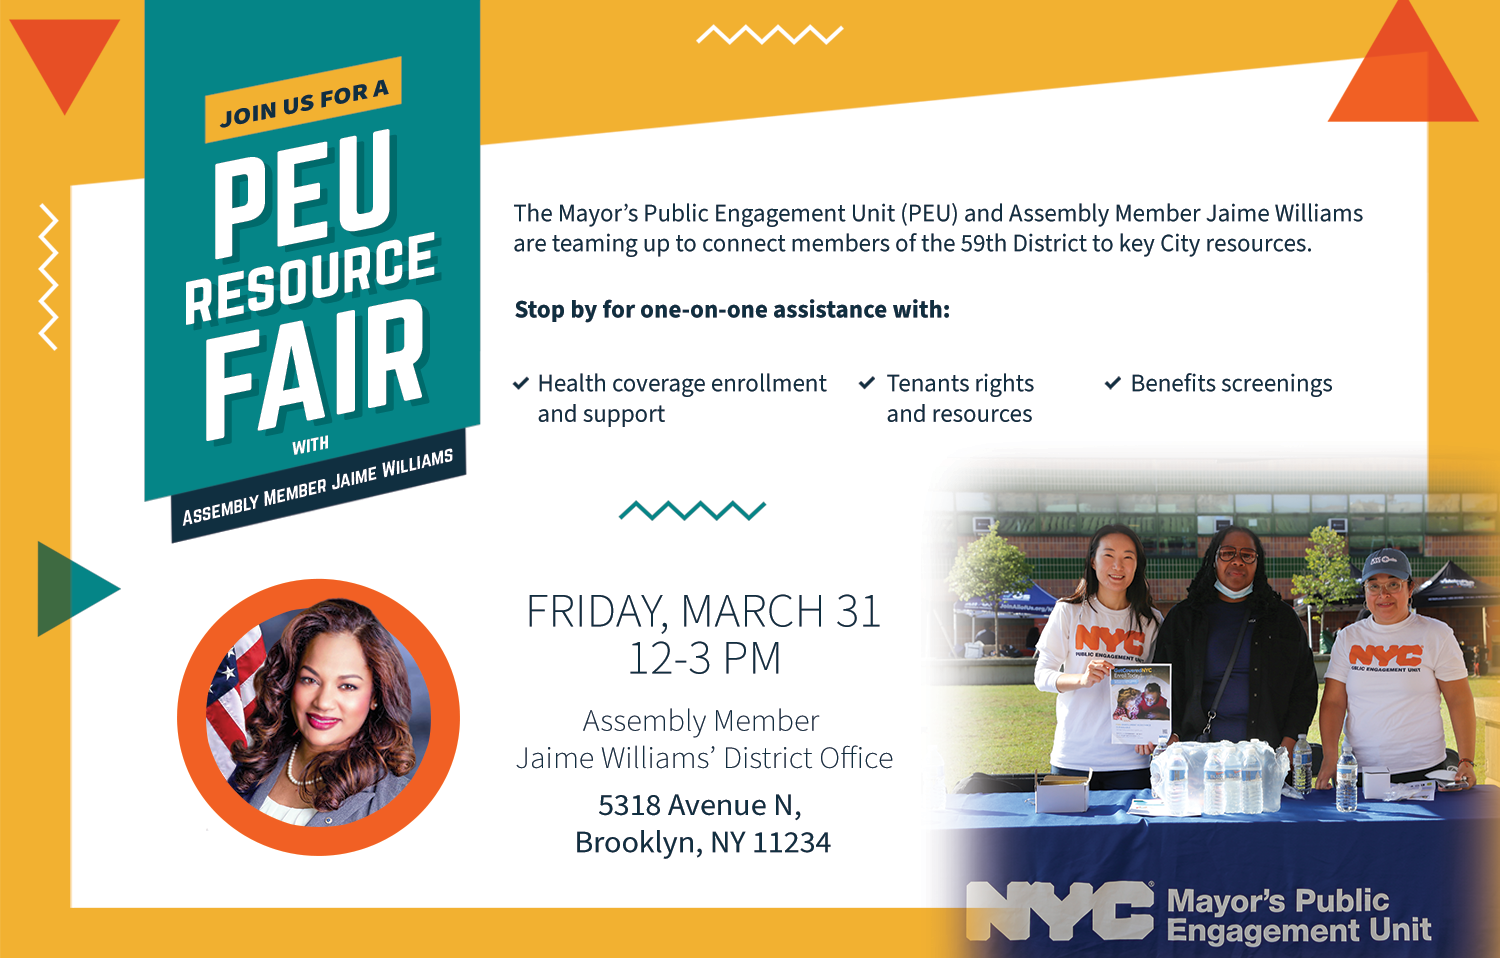 Learn about the PEU Resource Fair with Assembly Member Jaime Williams: March 31
                                           